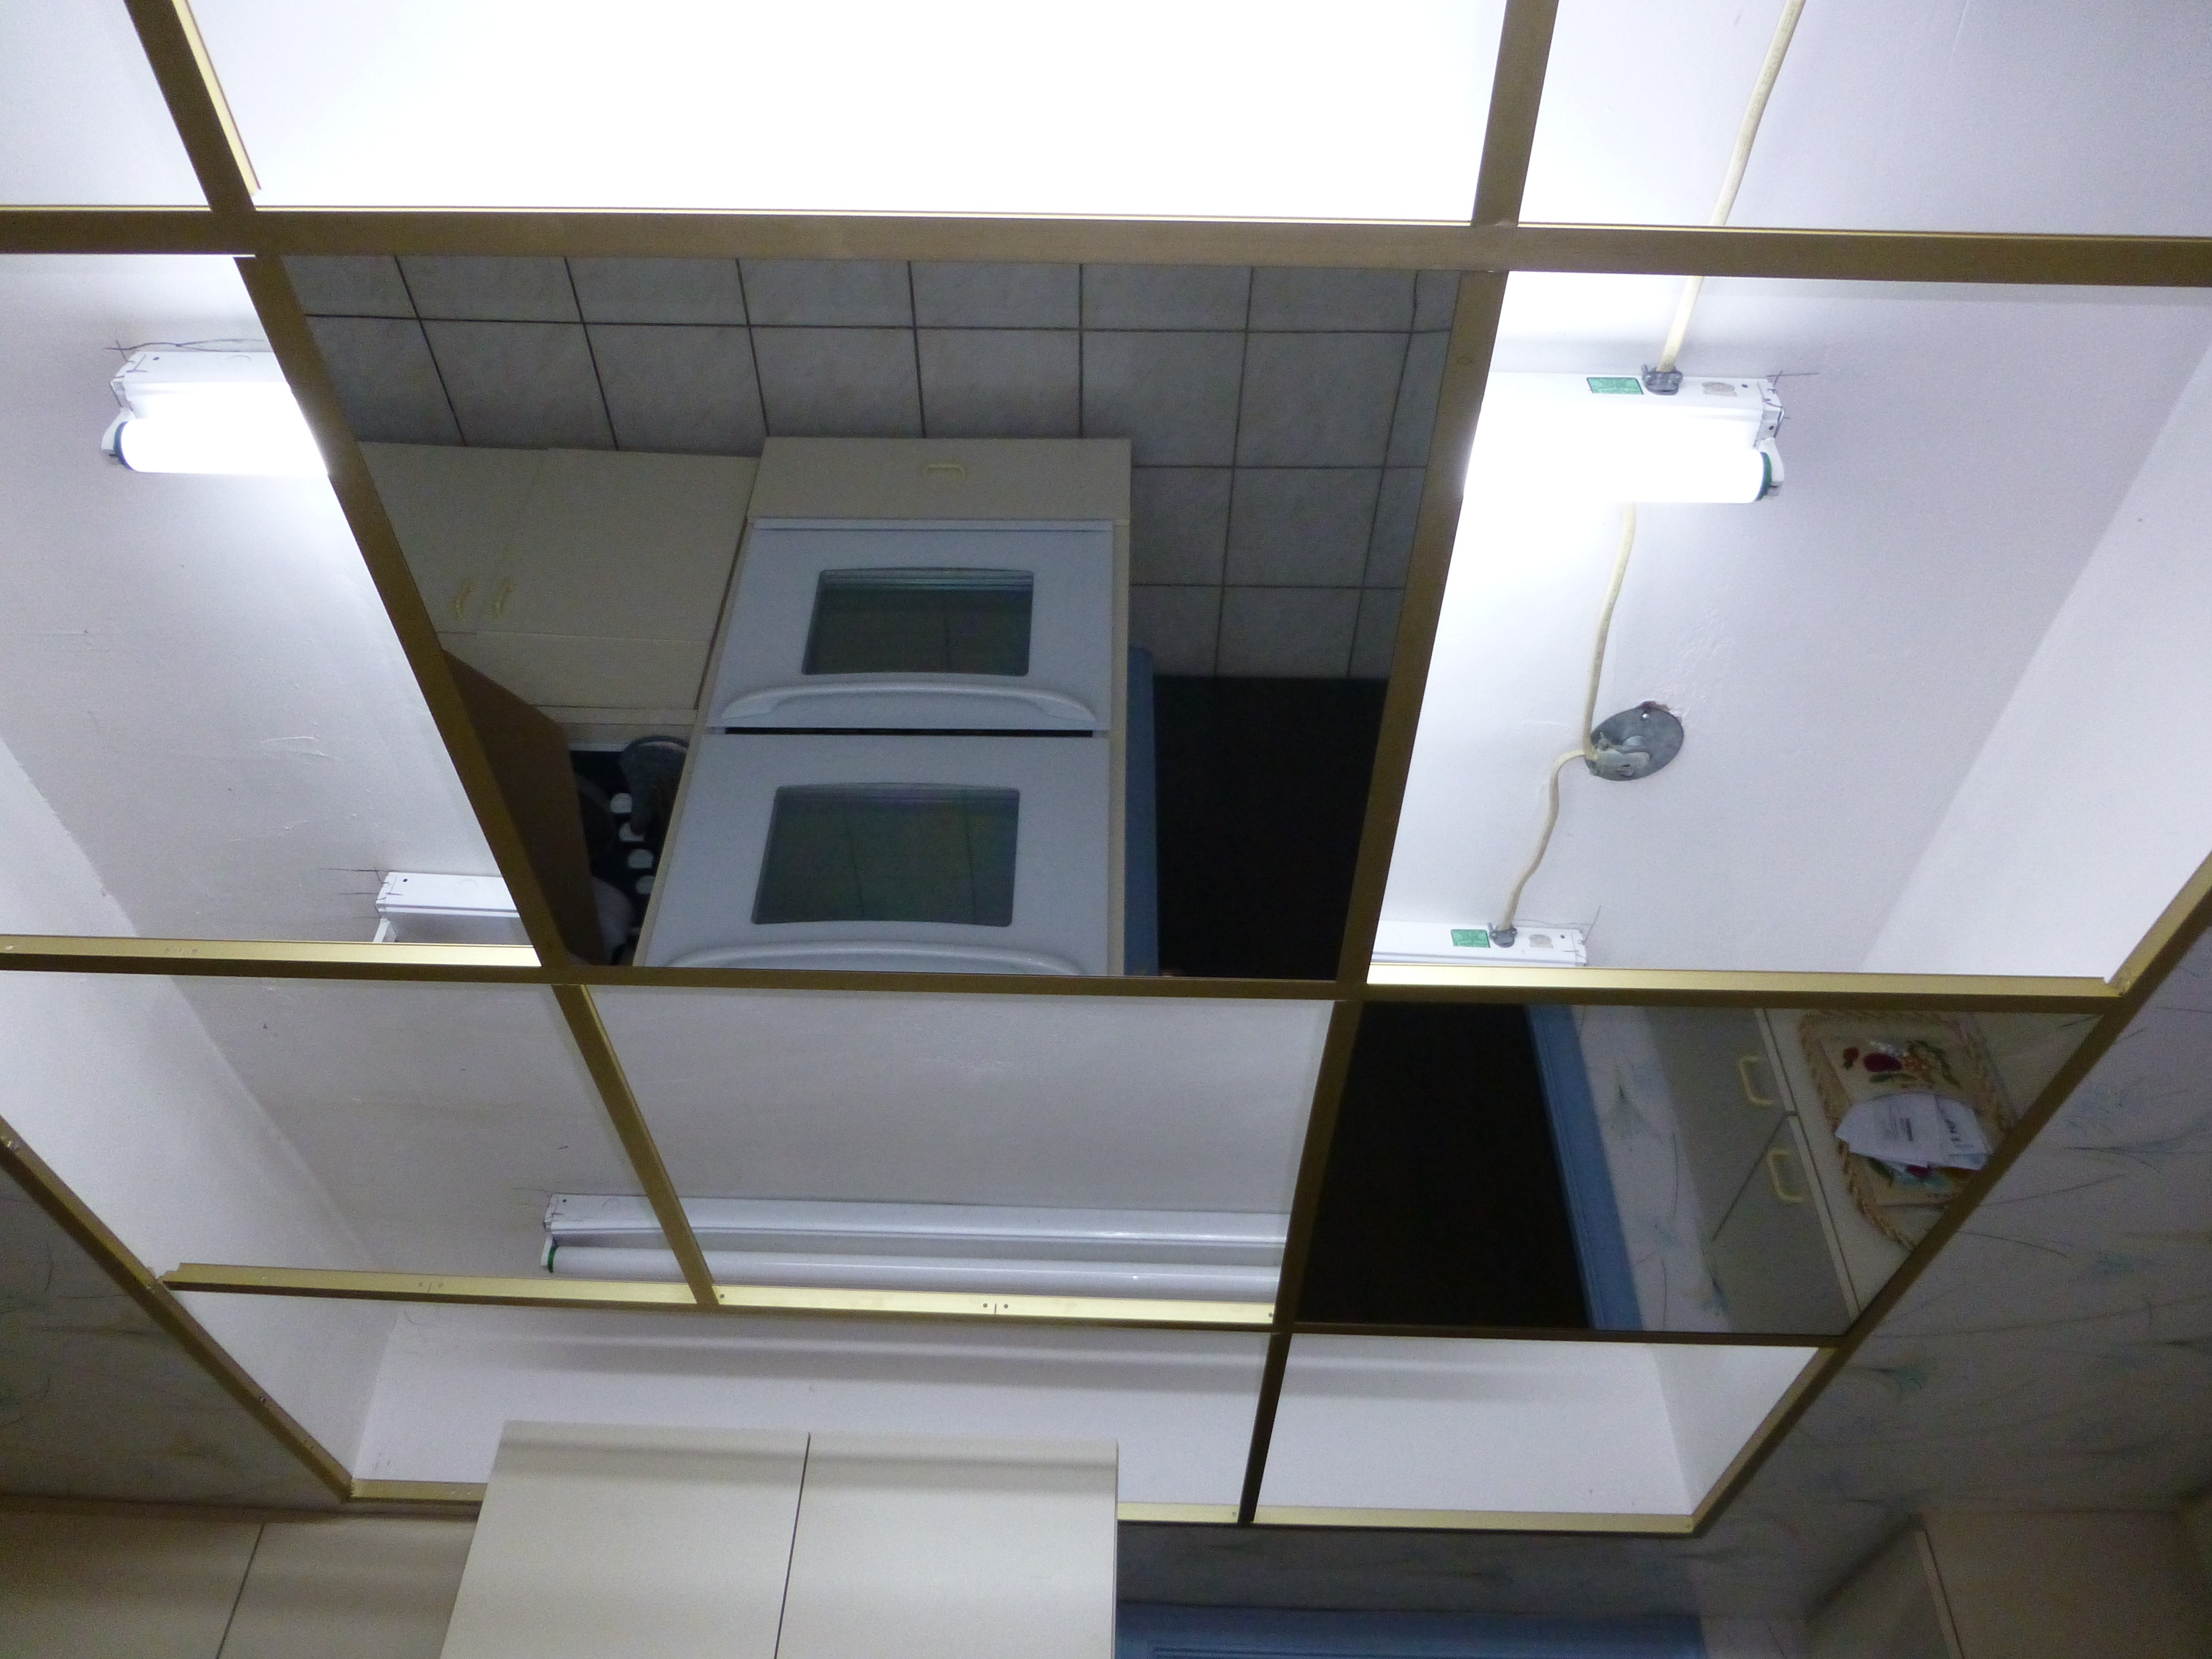 Reflective Drop Ceiling Tilesglass less mirror for grid suspended drop in ceiling tile dance